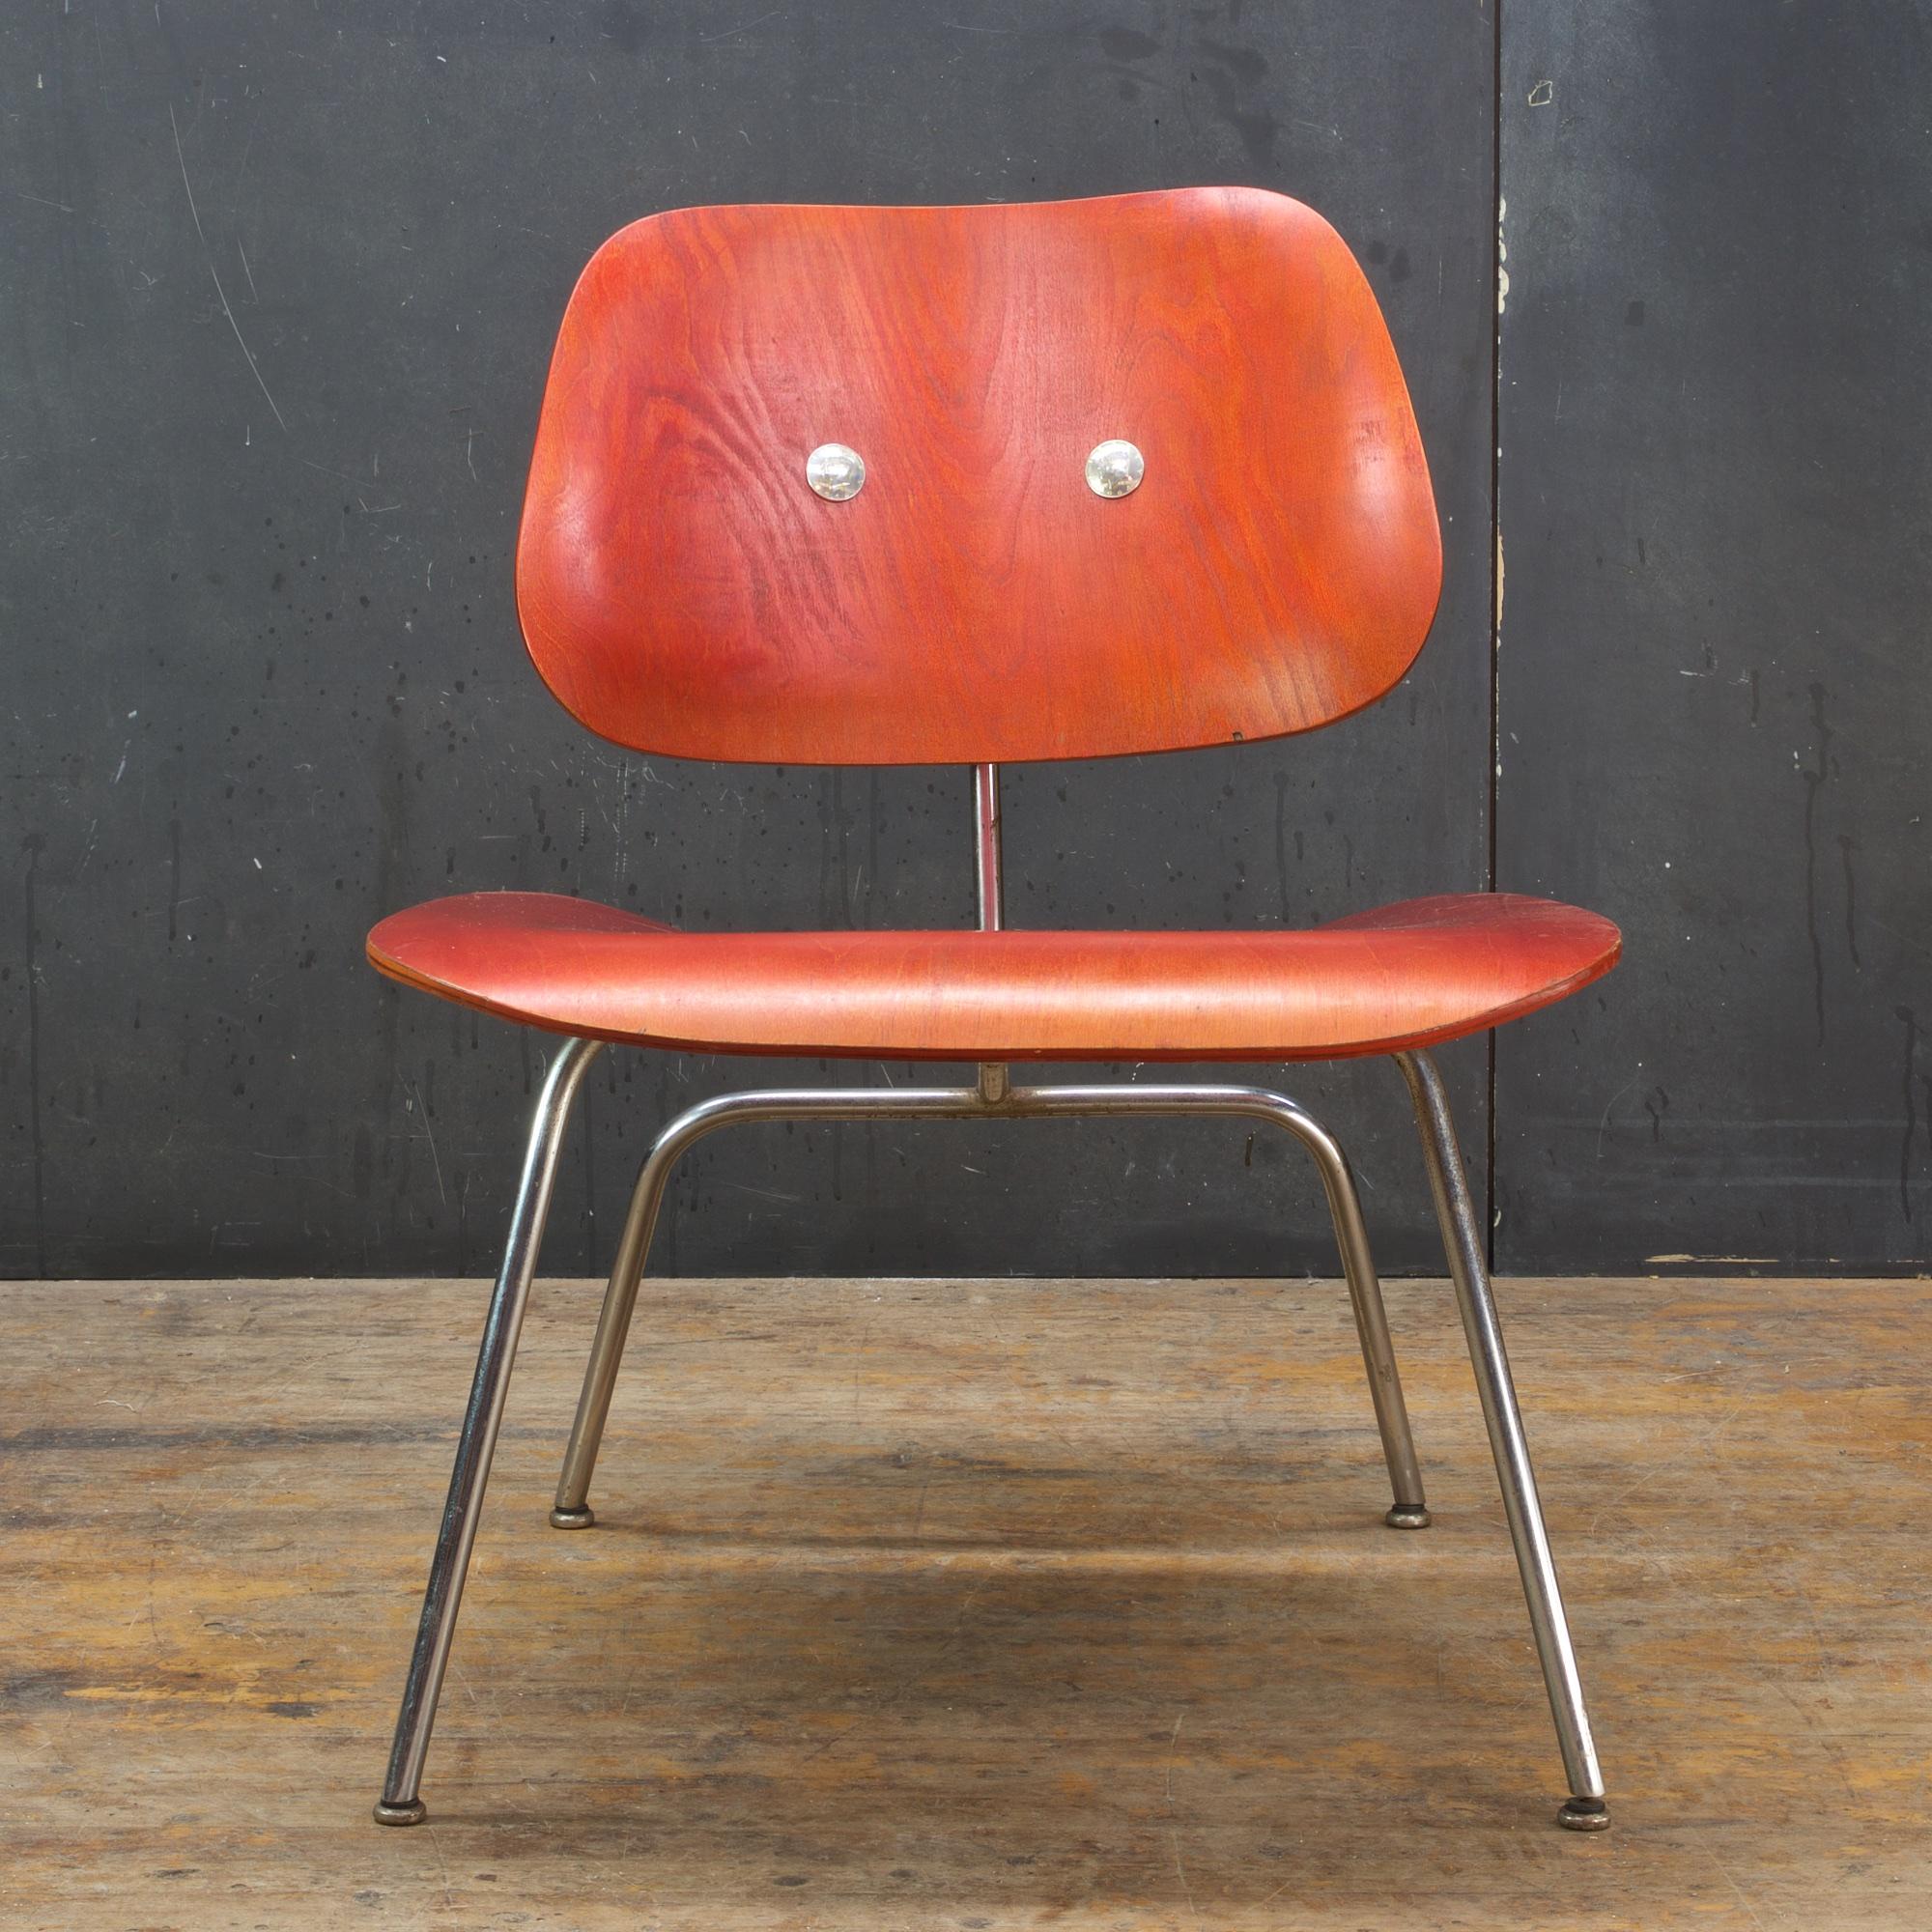 This vintage 1940s-1950s Eames LCM chair that is unrestored, the back rubber mounts have been drilled through to connect the back rest. This is a fully functional chair as shown.

We used silver 1964 Kennedy Half Dollars bolts to cover the holes and